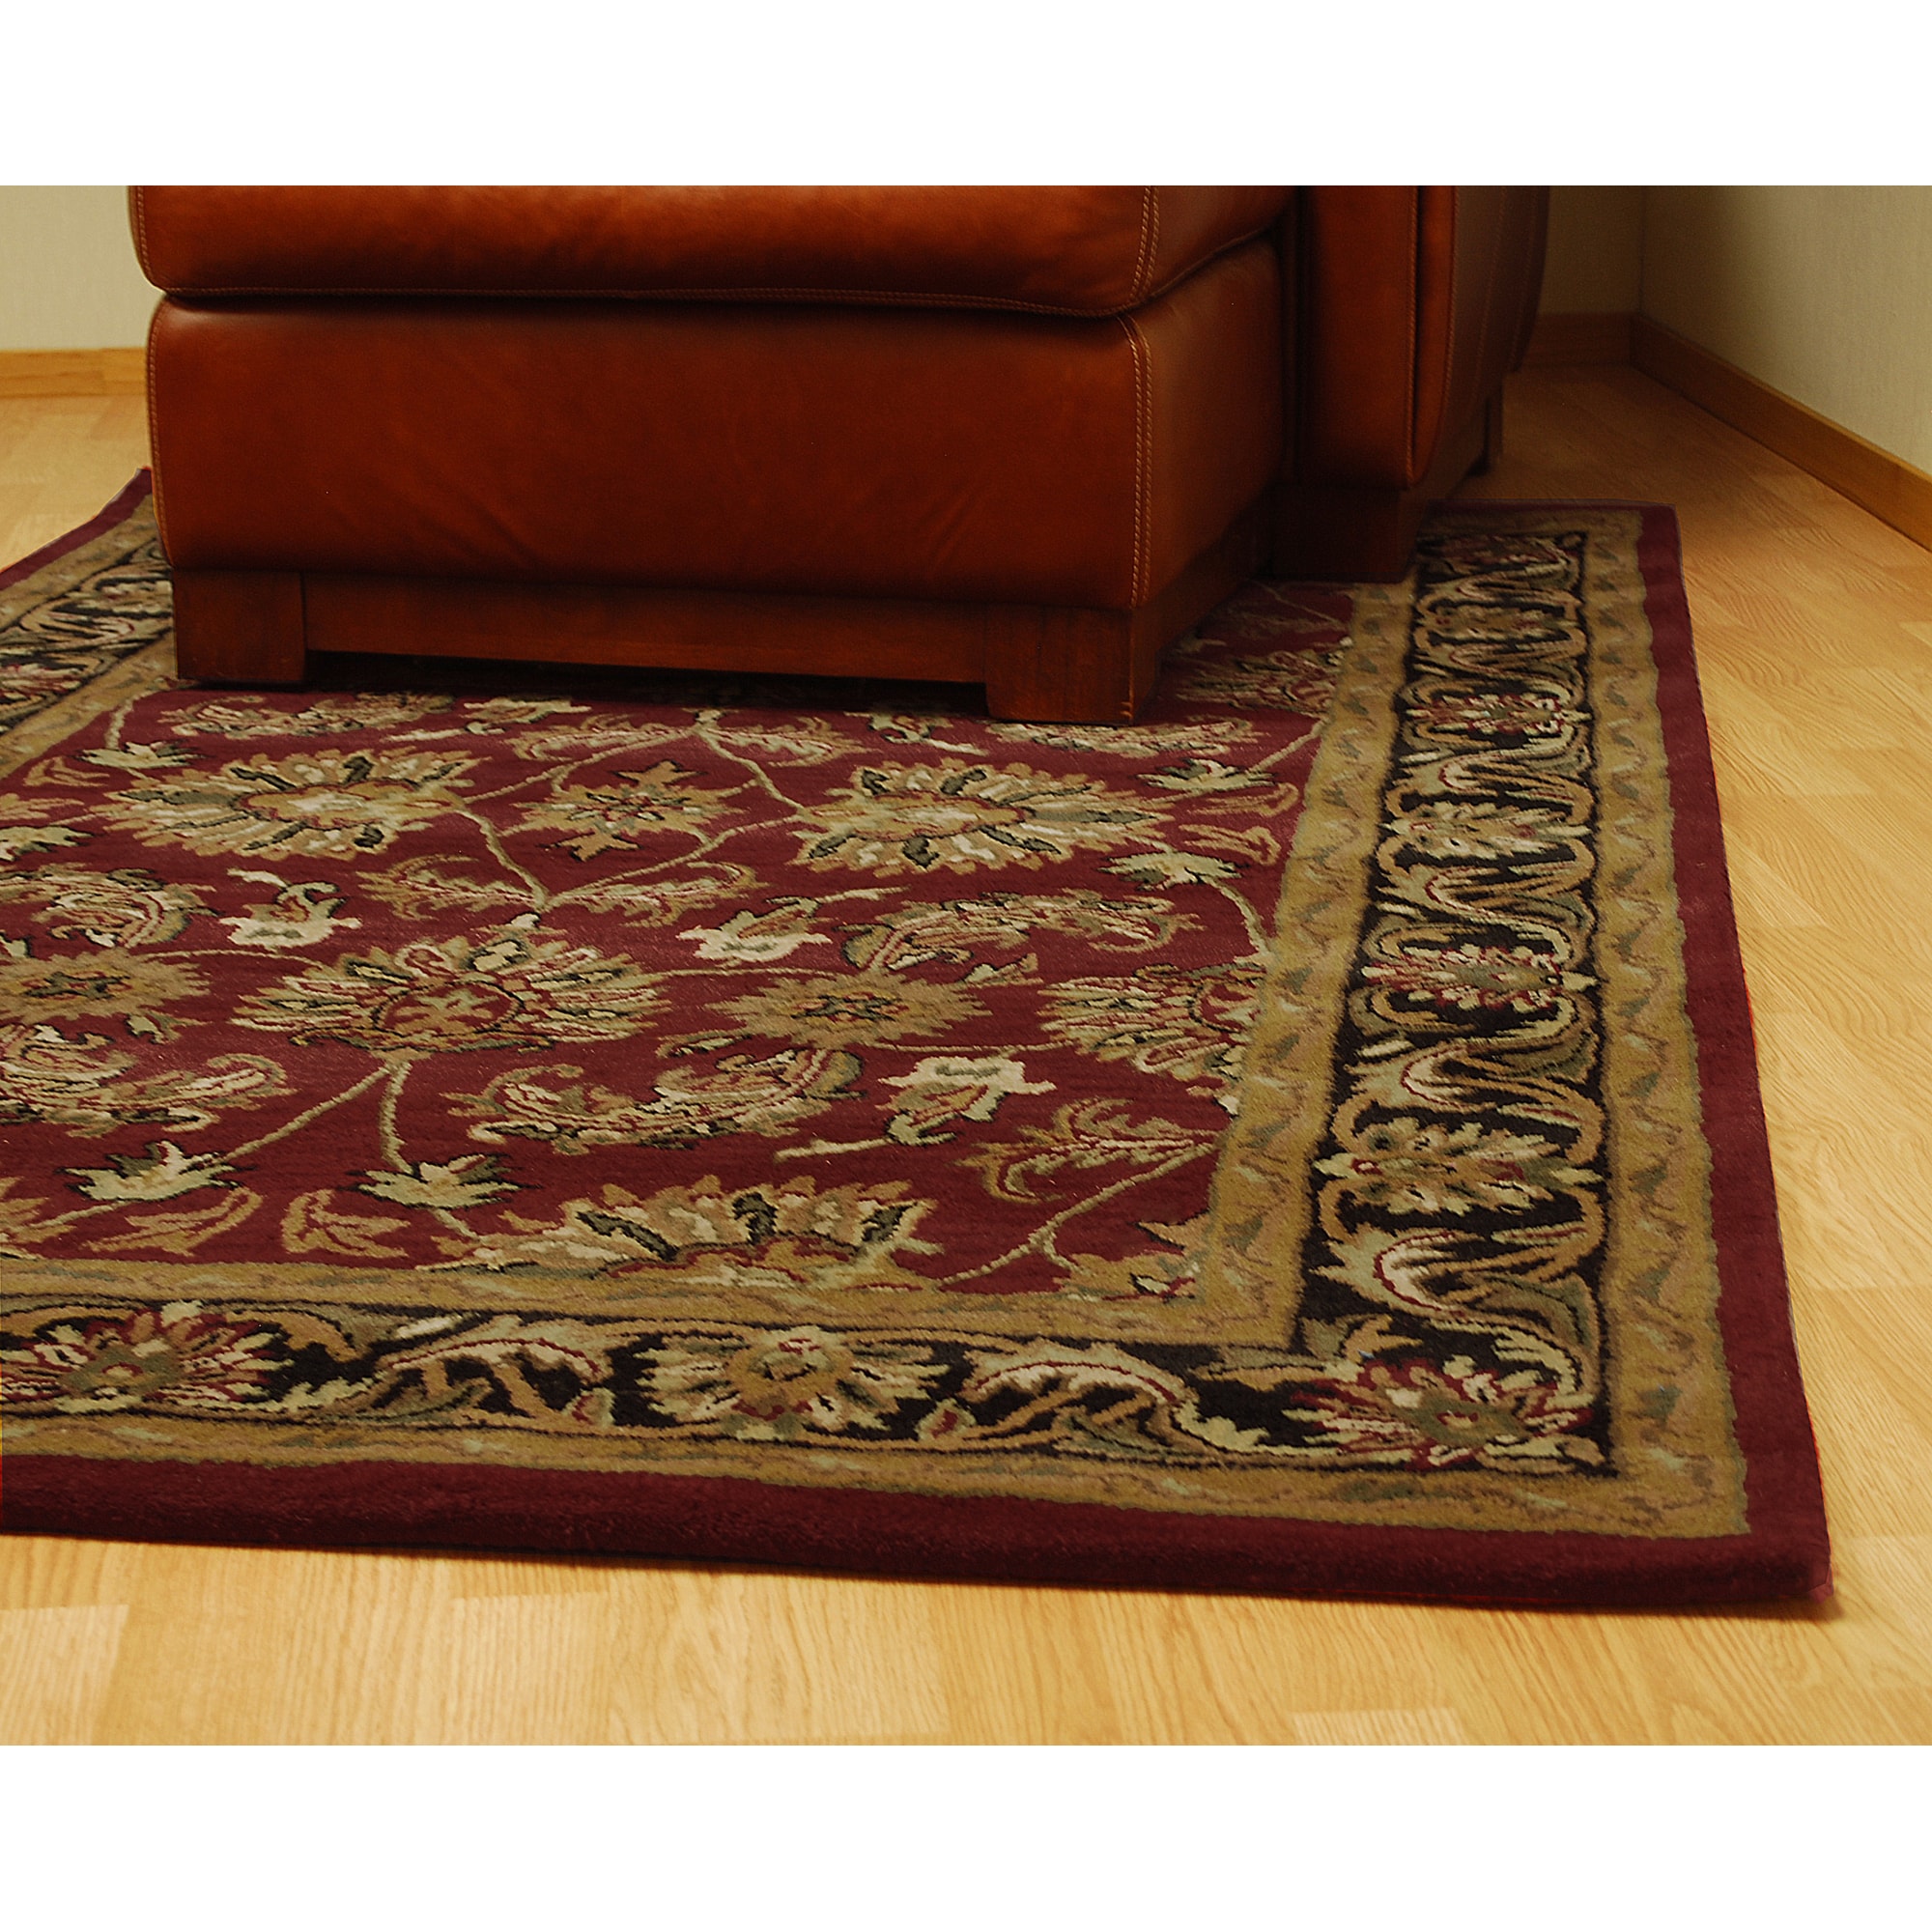 Burgundy Red Traditional Classic Oriental Wool Small Rug Mat 60x110cm 50%OFF RRP 